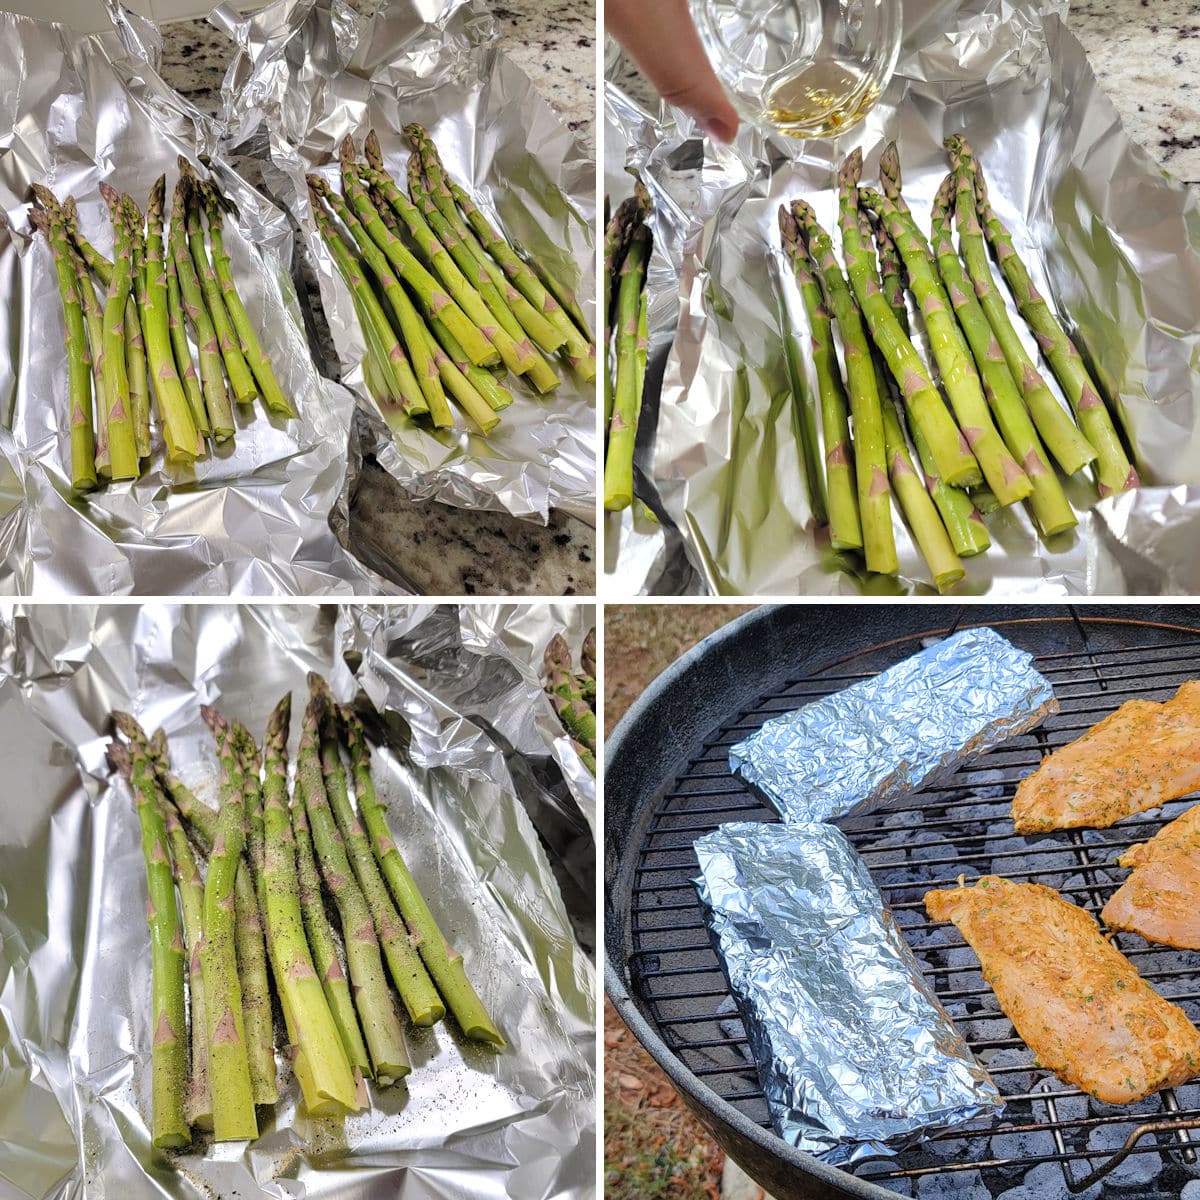 Preparing and grilling asparagus in foil packets.